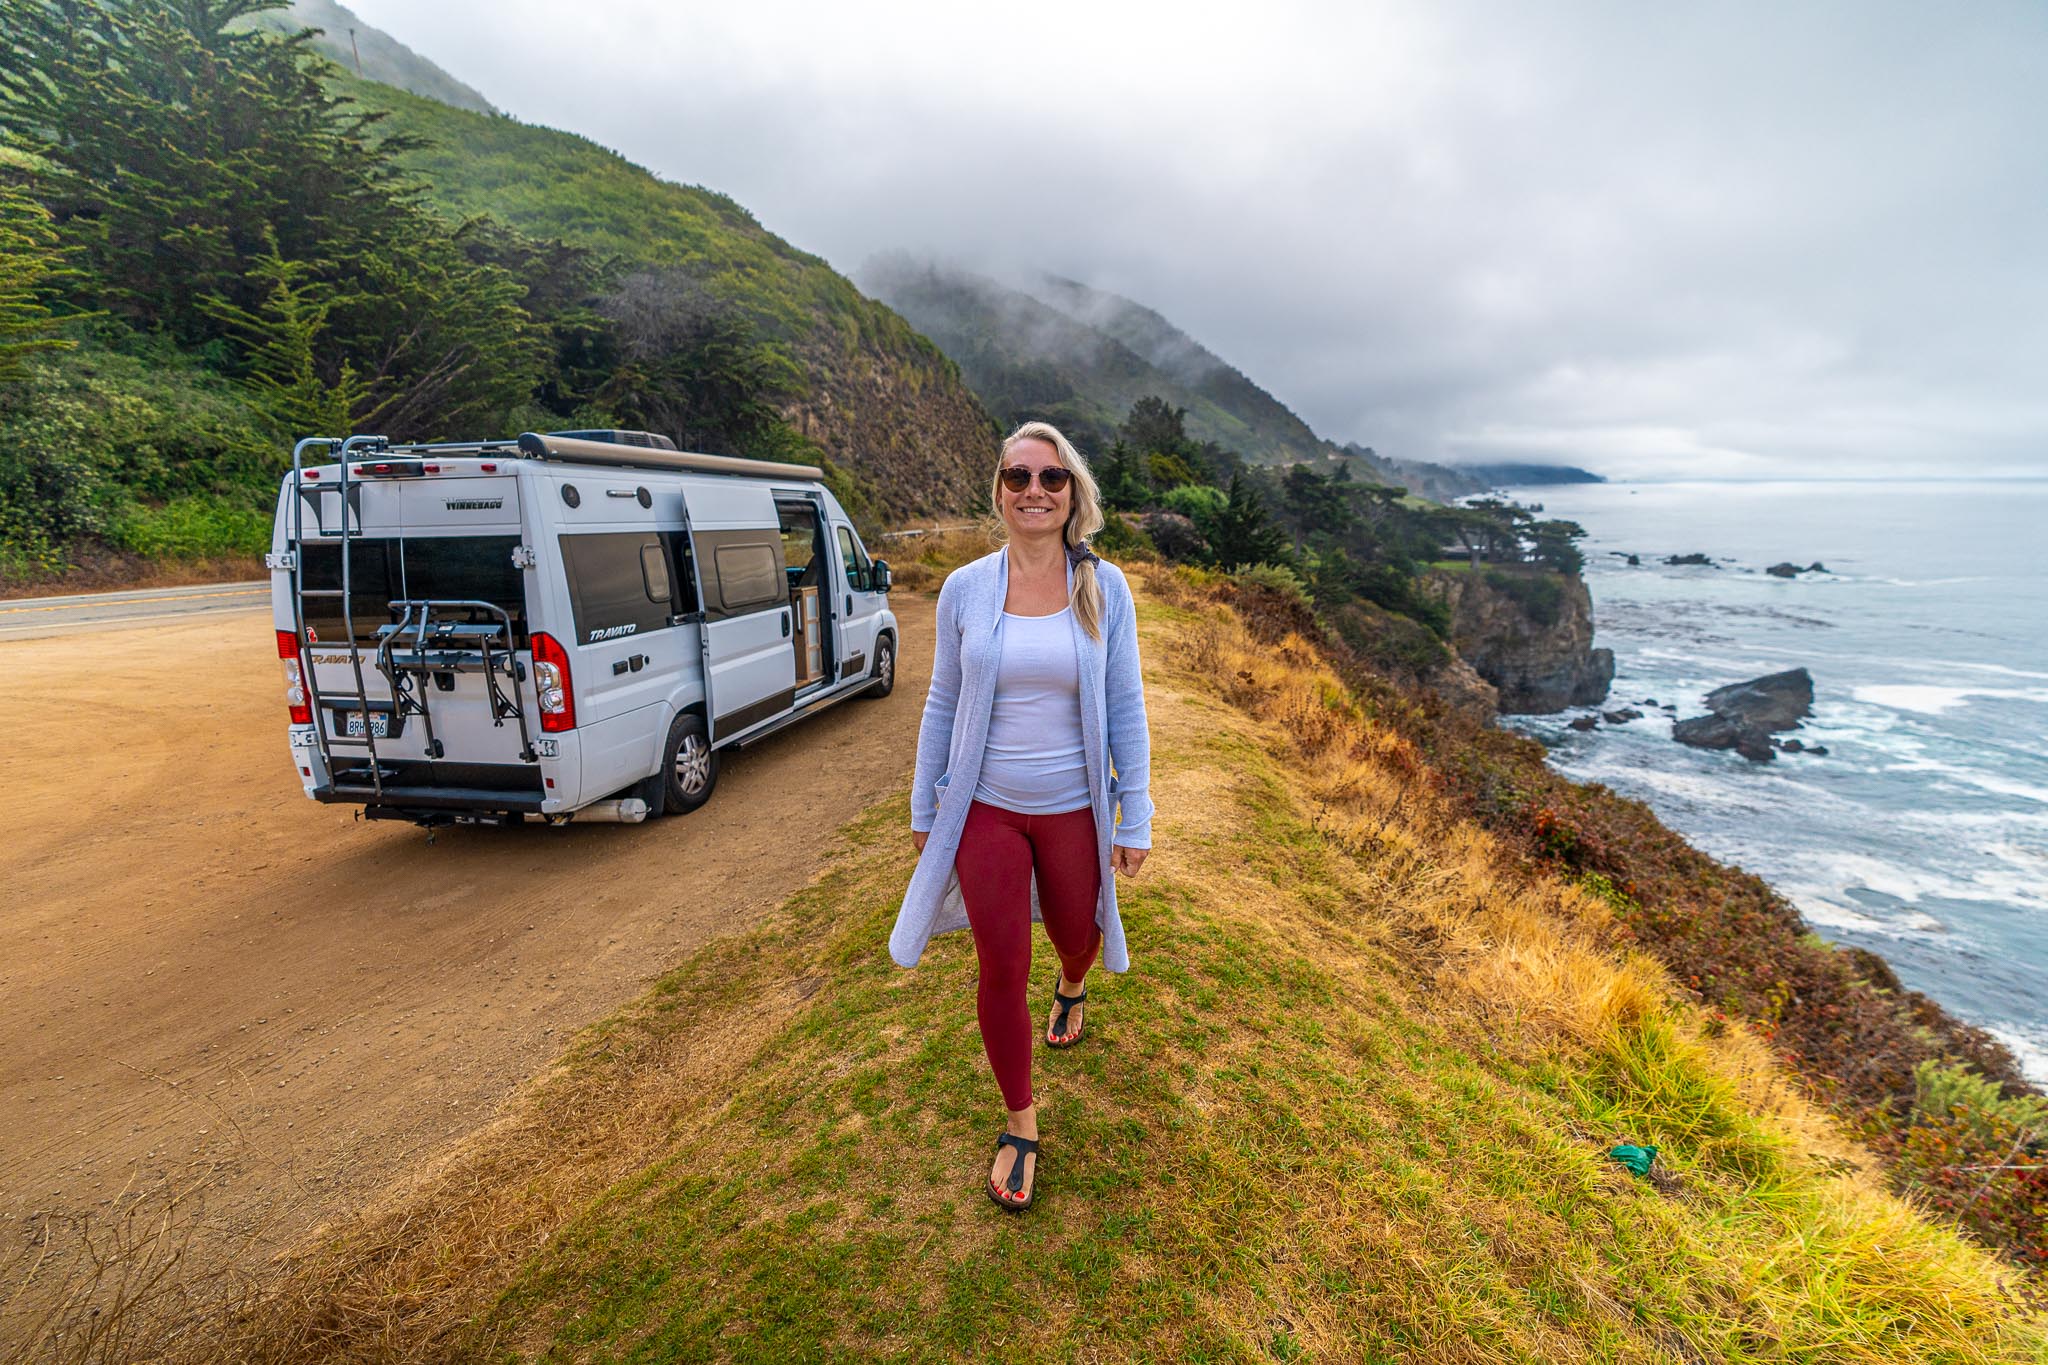 From Sonoma to Big Sur in a Travel Van